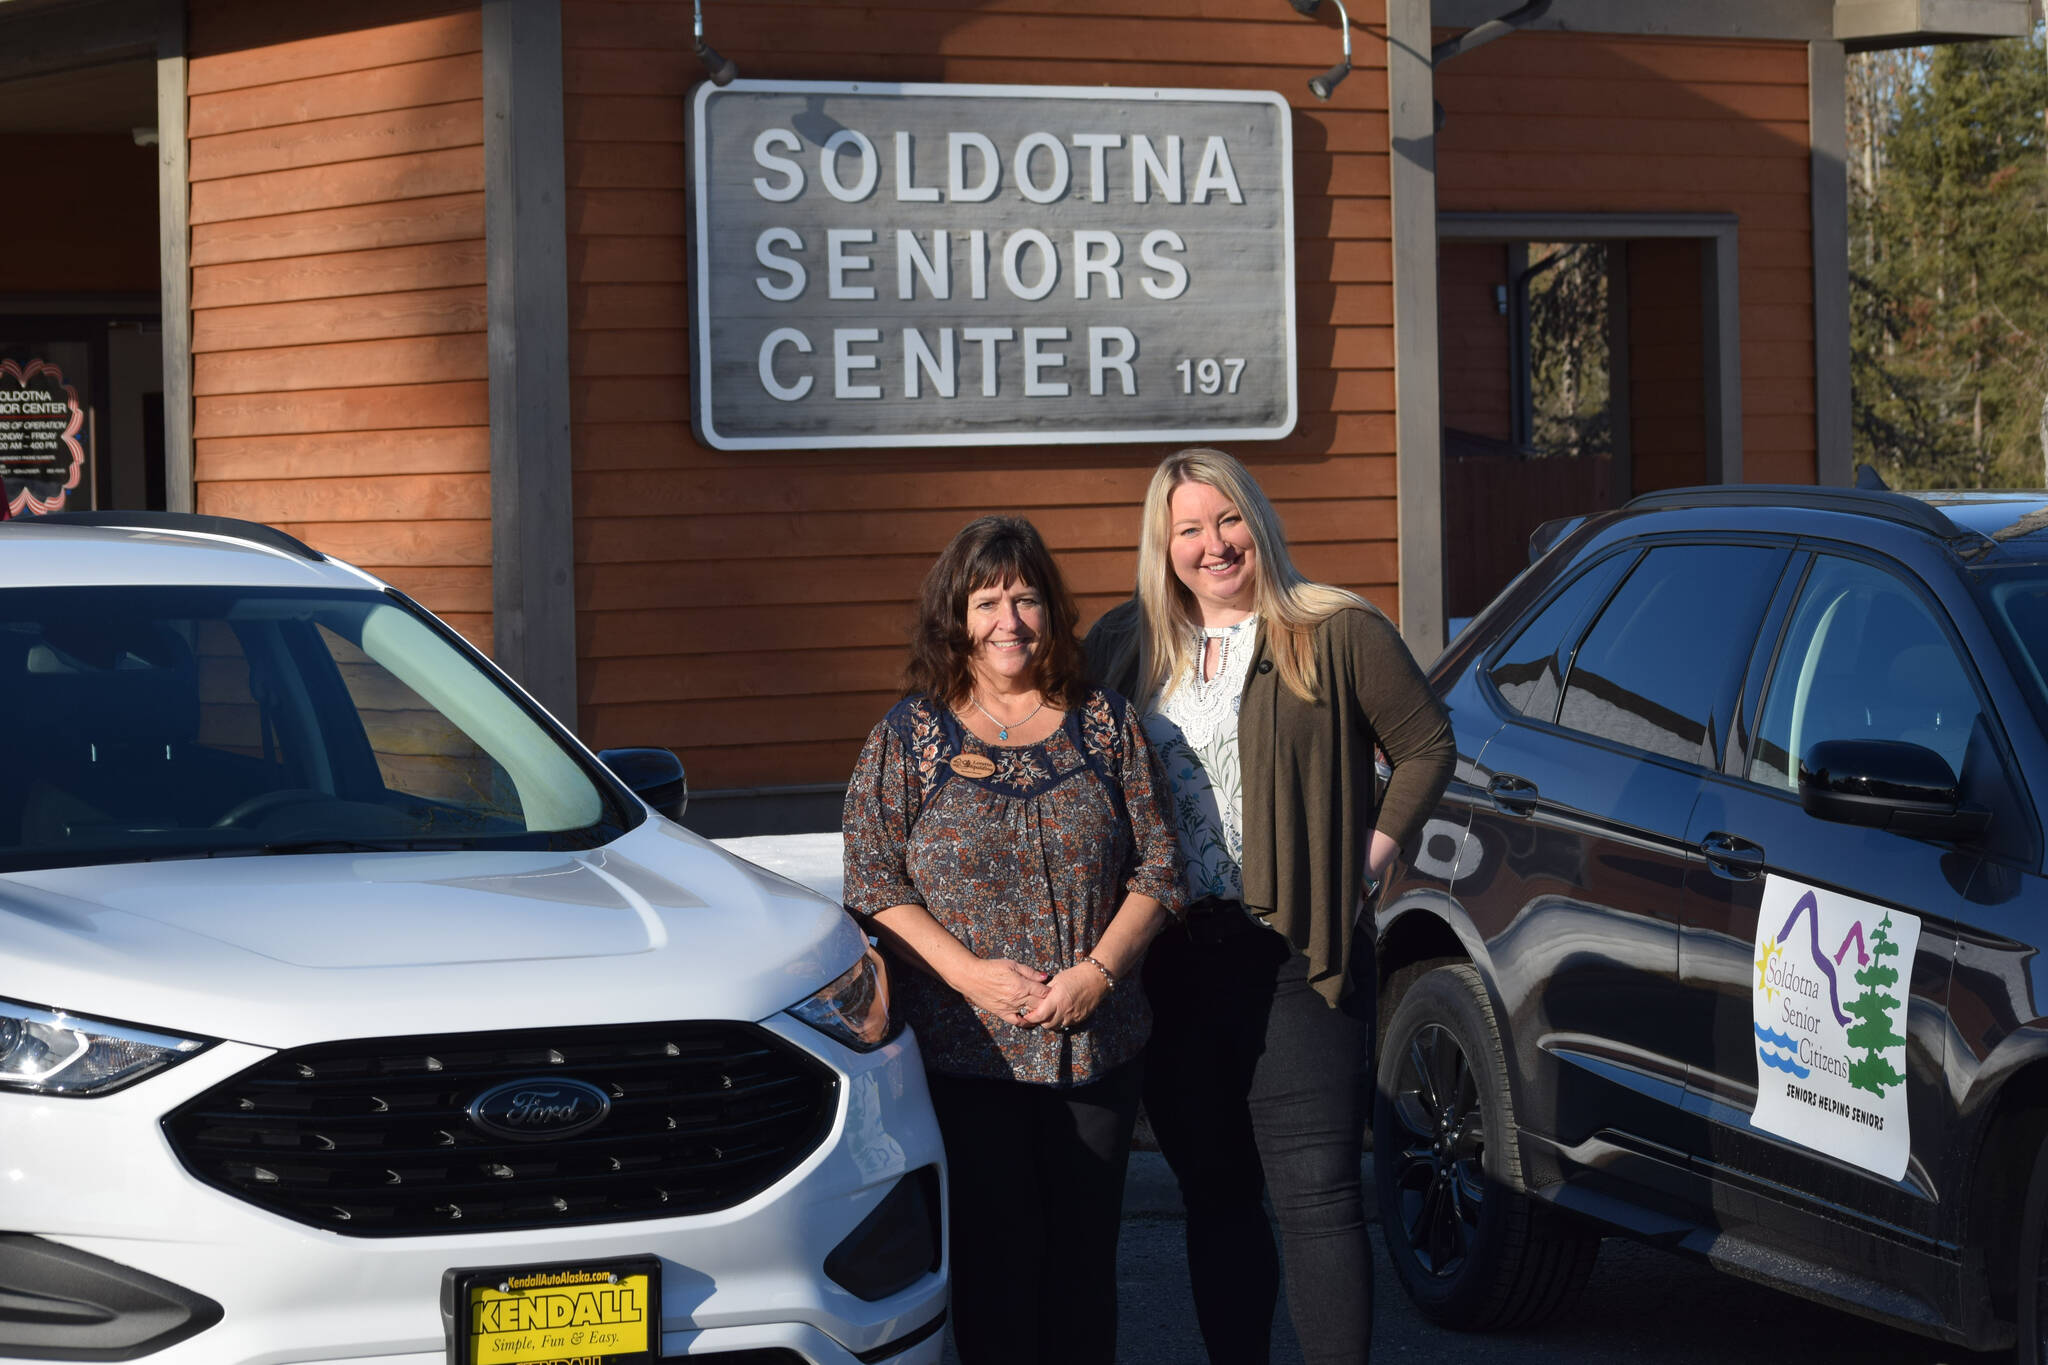 Loretta Knudson-Spalding, left, and Regional Director of the Office of the Governor Jill Schaefer, right, pose next to the Soldotna Senior Center’s new cars in Soldotna on Wednesday, March 30, 2022. (Camille Botello/Peninsula Clarion)